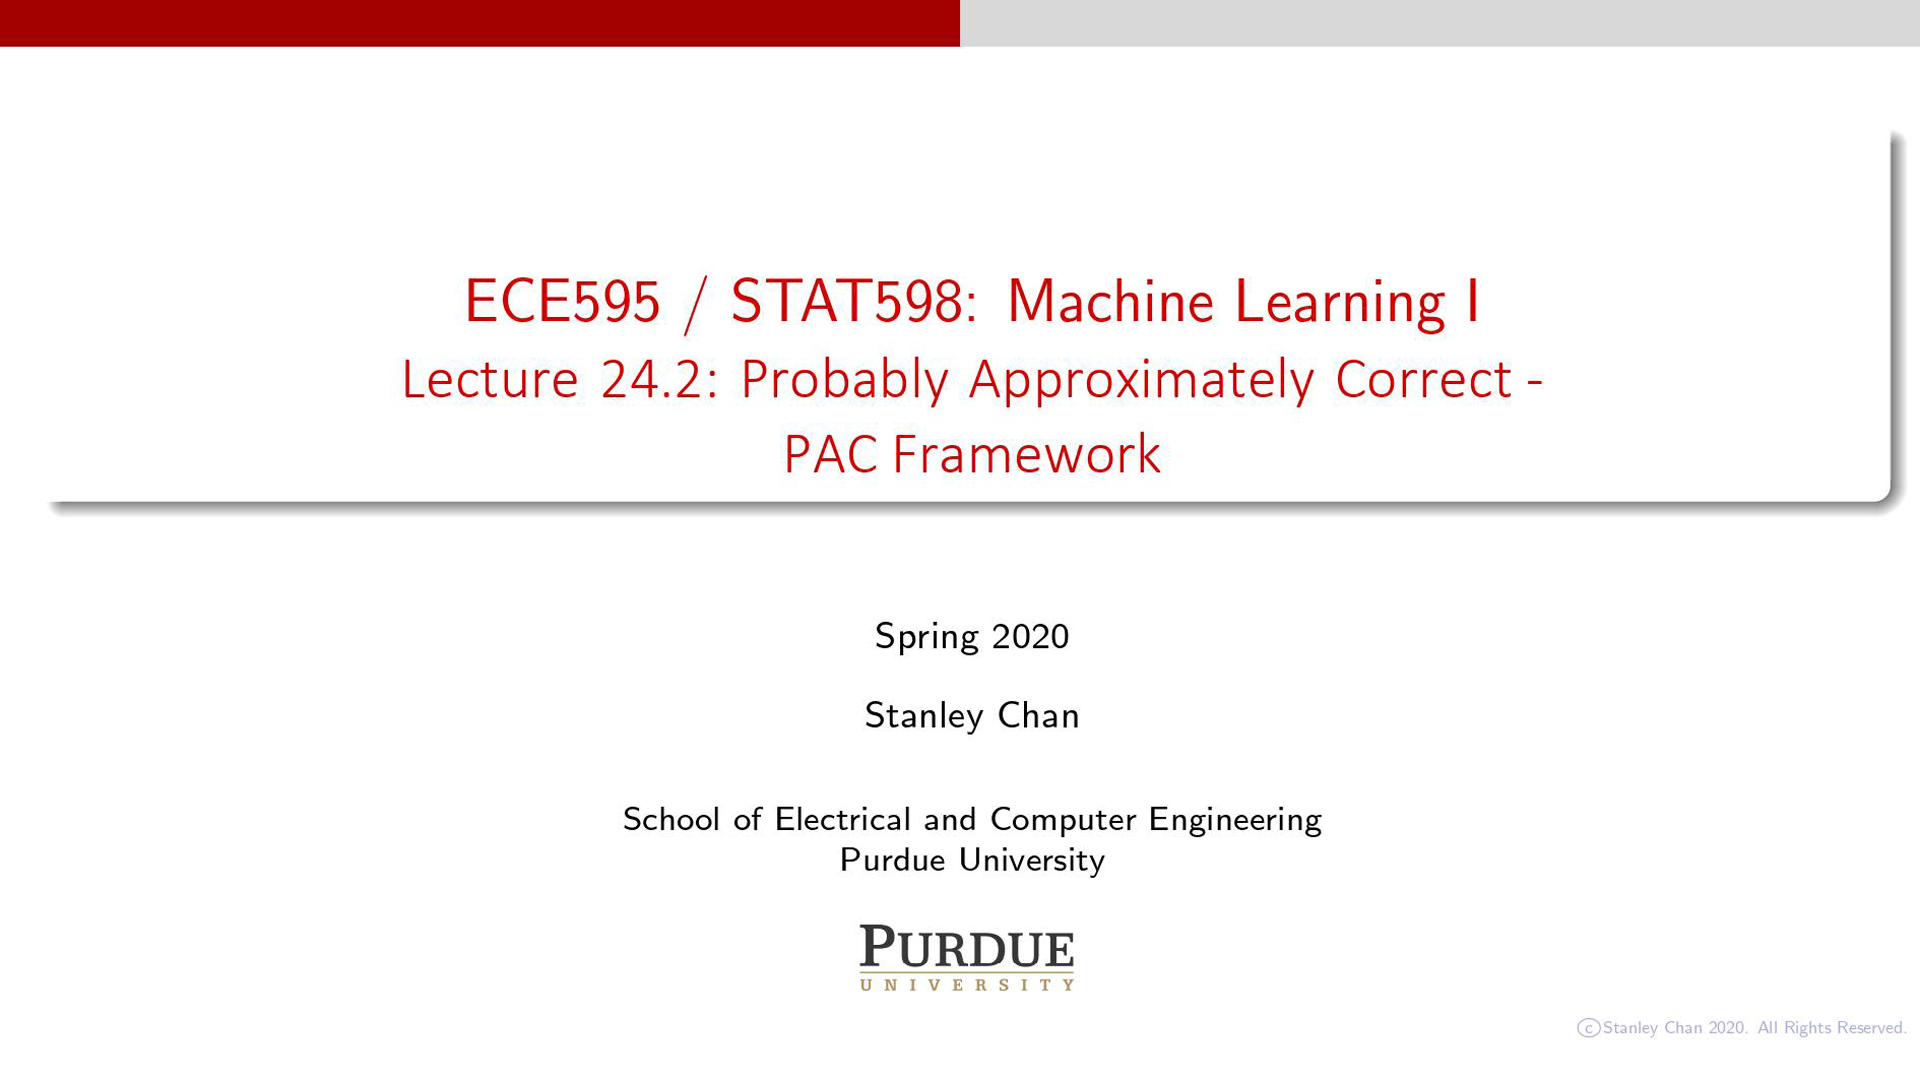 Lecture 24.2: Probably Approximately Correct - PAC Framework